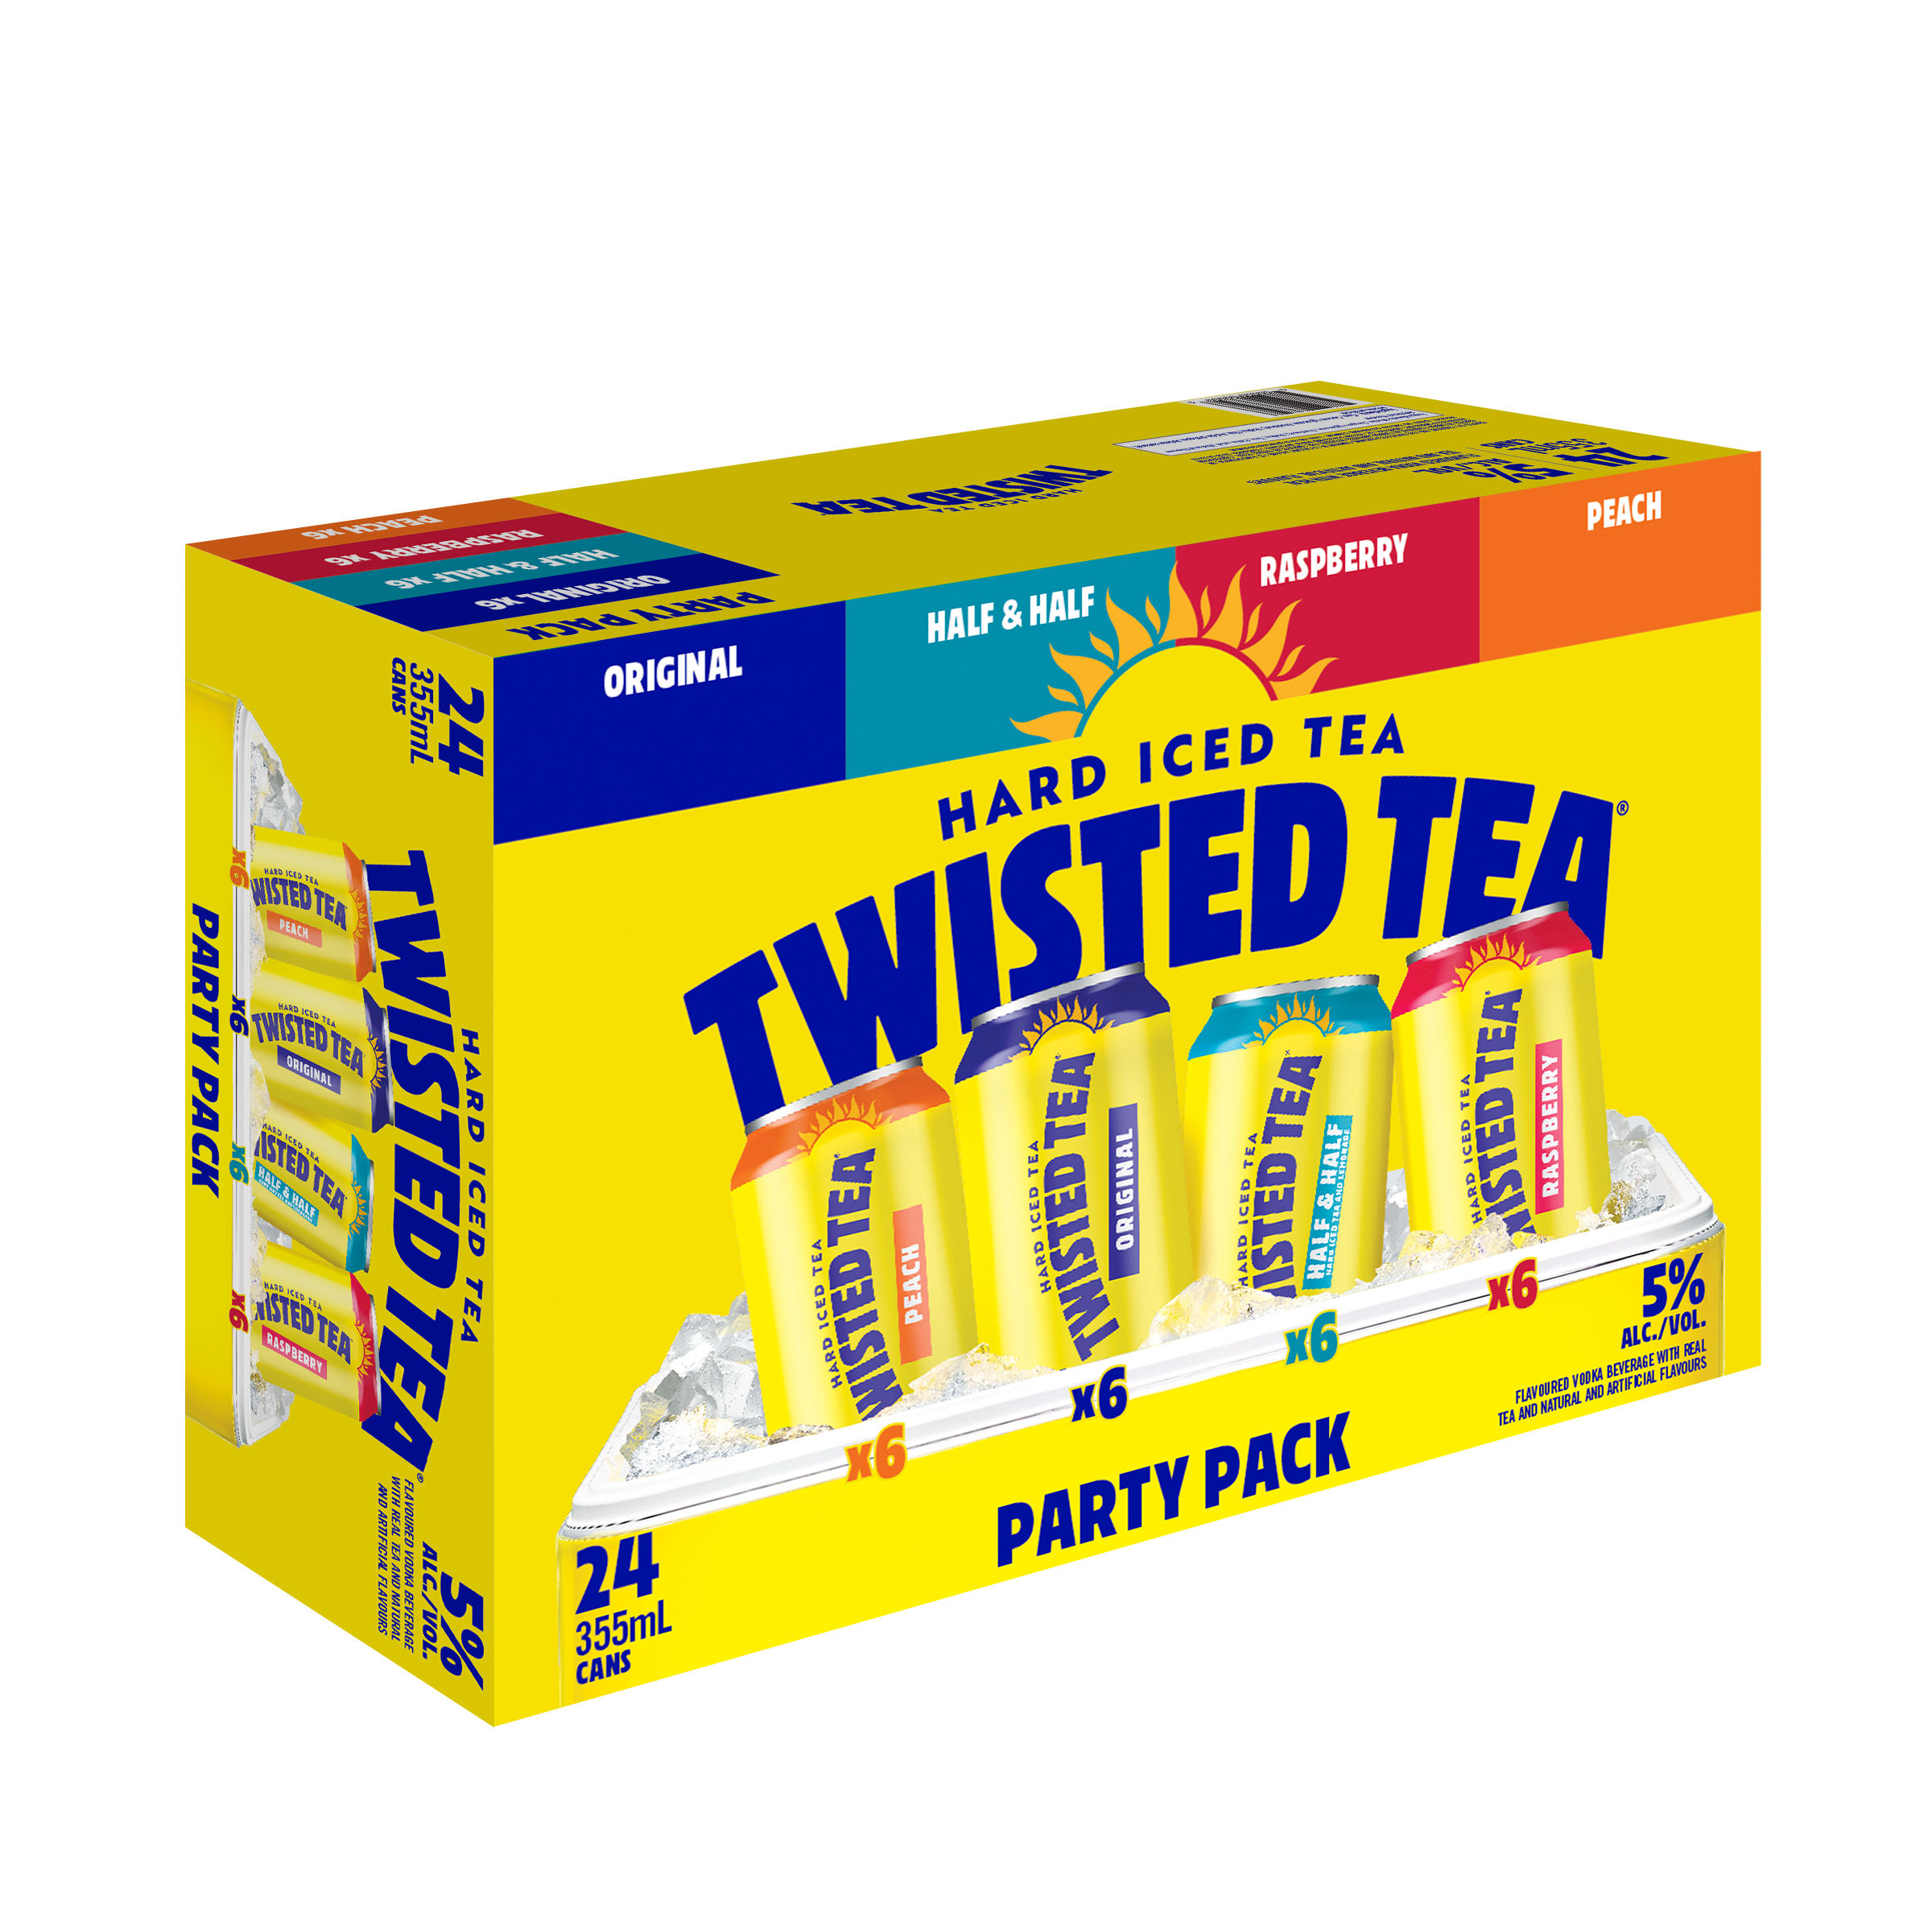 Twisted Tea Variety Pack box with three flavors: Original, Raspberry and Peach